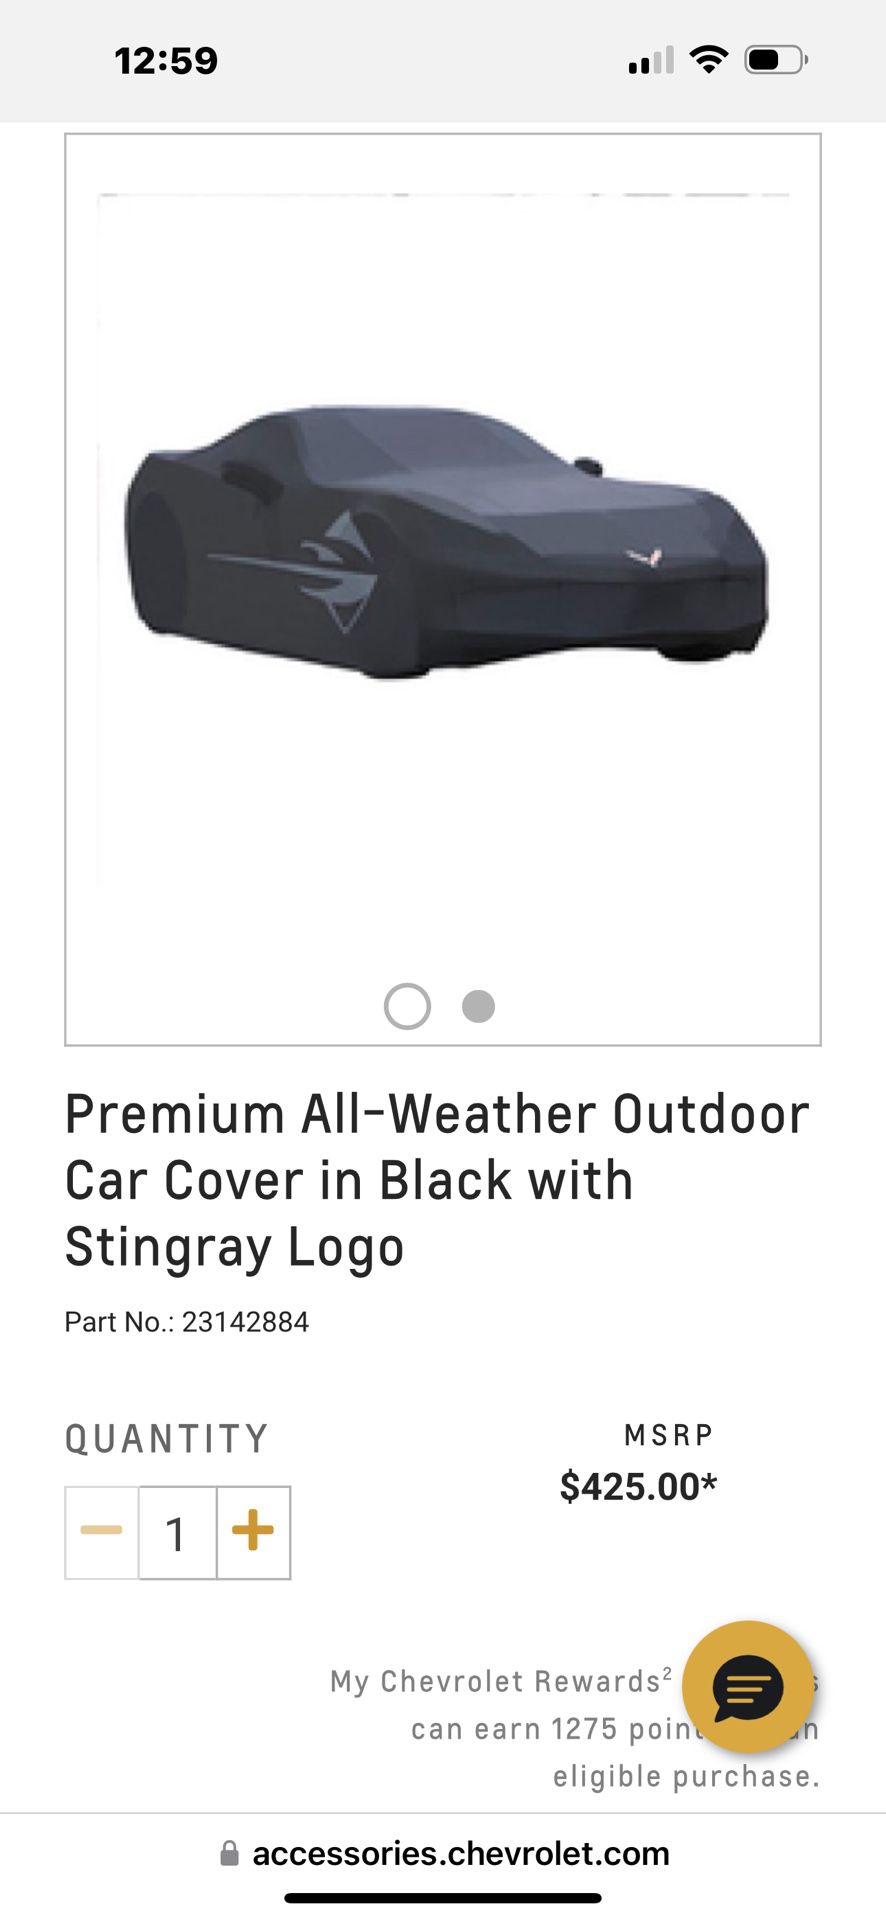 Premium All-Weather Outdoor Car Cover in Black with Stingray Logo